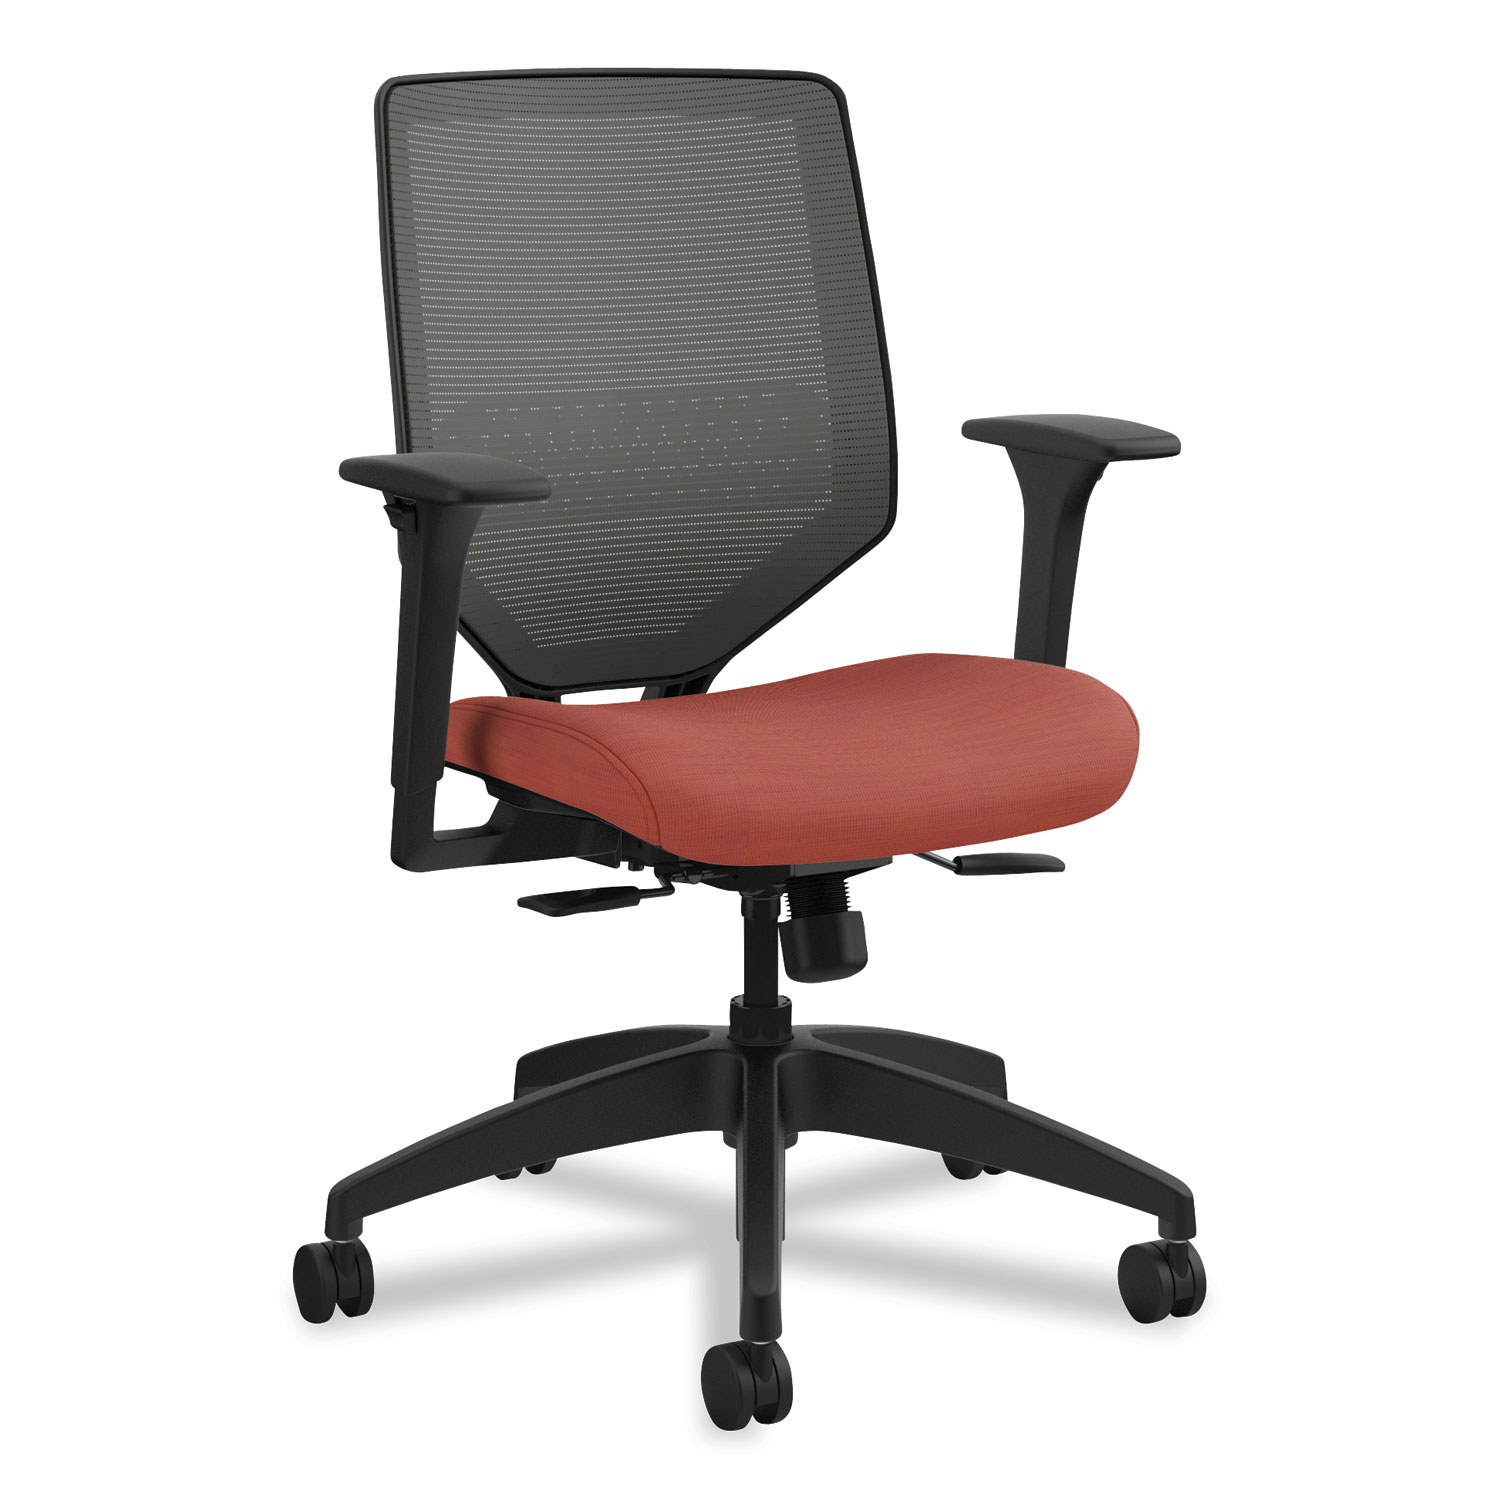  HON HONSVM1ALICC46T Solve Series Mesh Back Task Chair, Supports up to 300 lbs., Bittersweet Seat, Charcoal Back, Black Base (HONSVM1ALICC46T) 